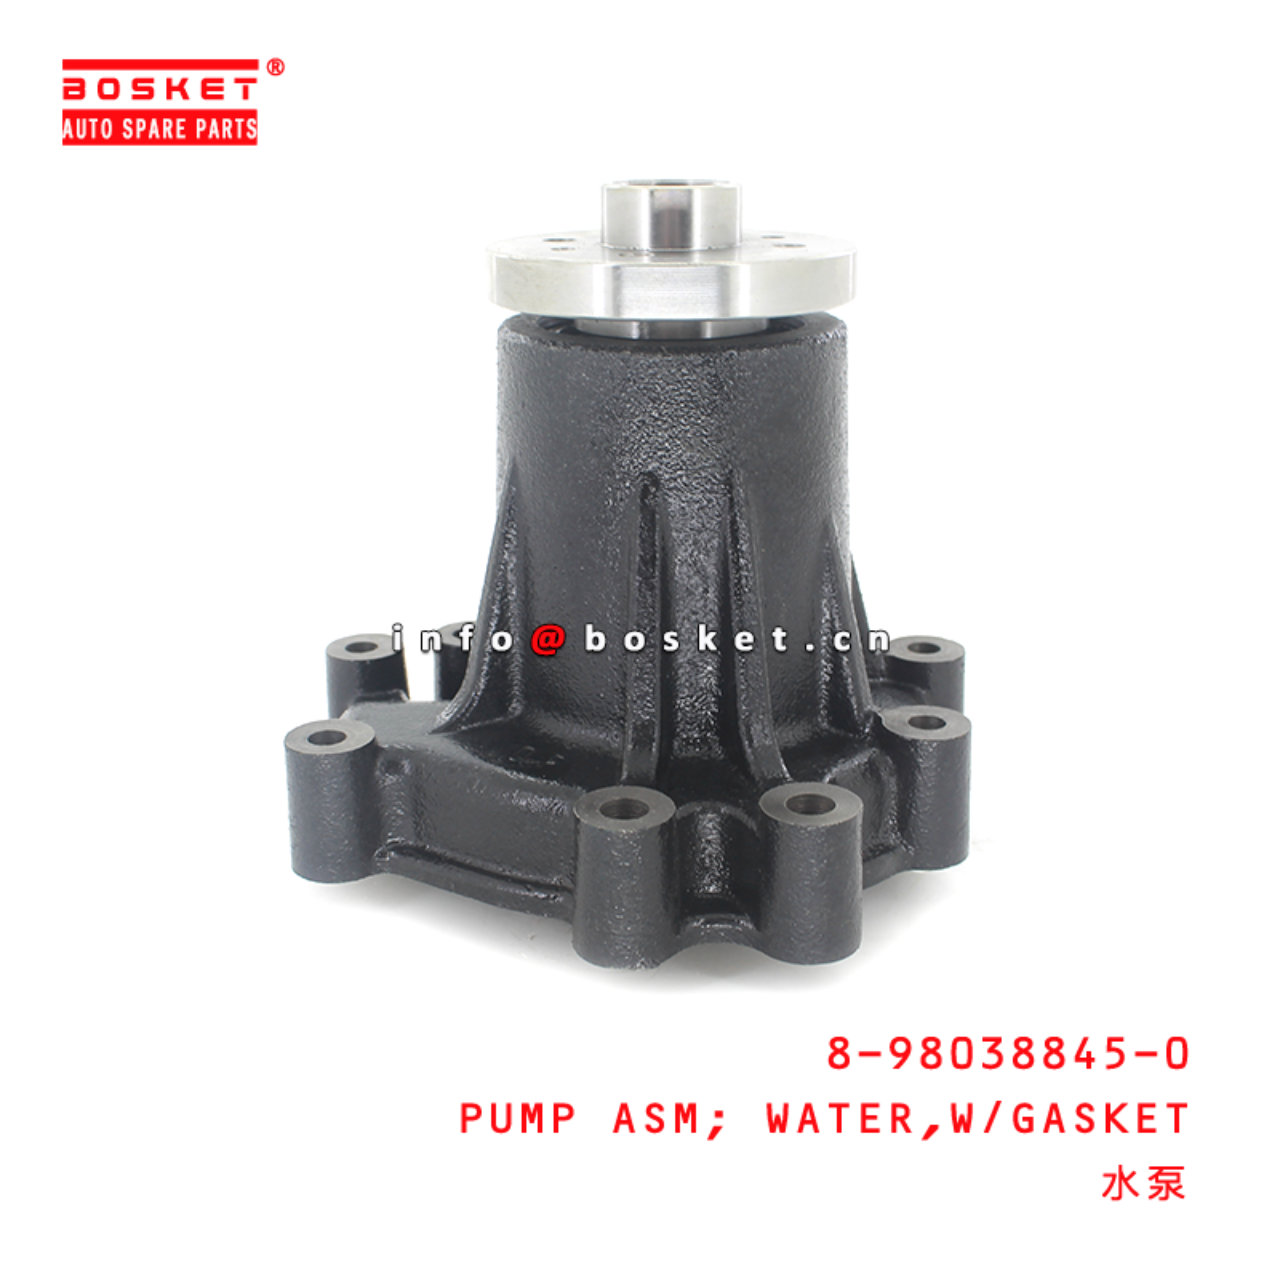 8-98038845-0 With Gasket Water Pump Assembly Suita...